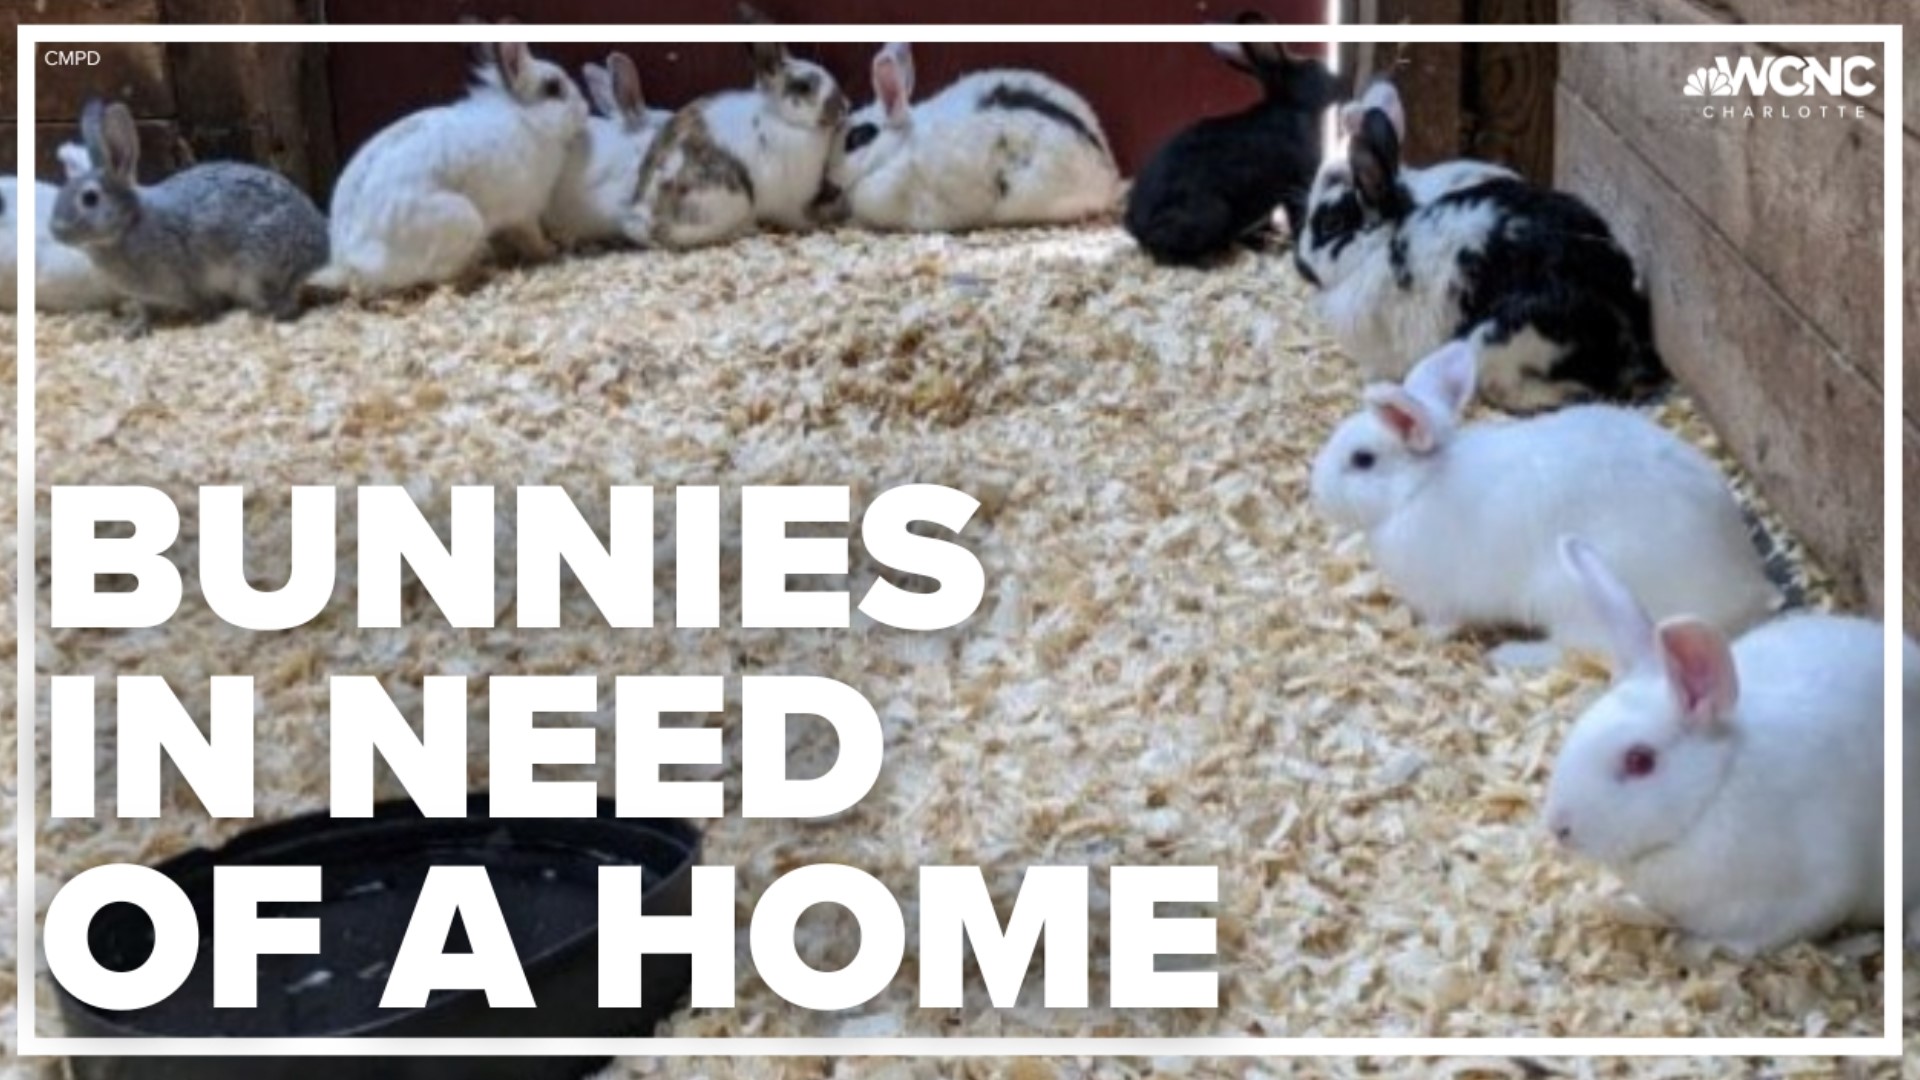 CMPD Animal Care and Control needs your help finding homes for 30 bunnies.